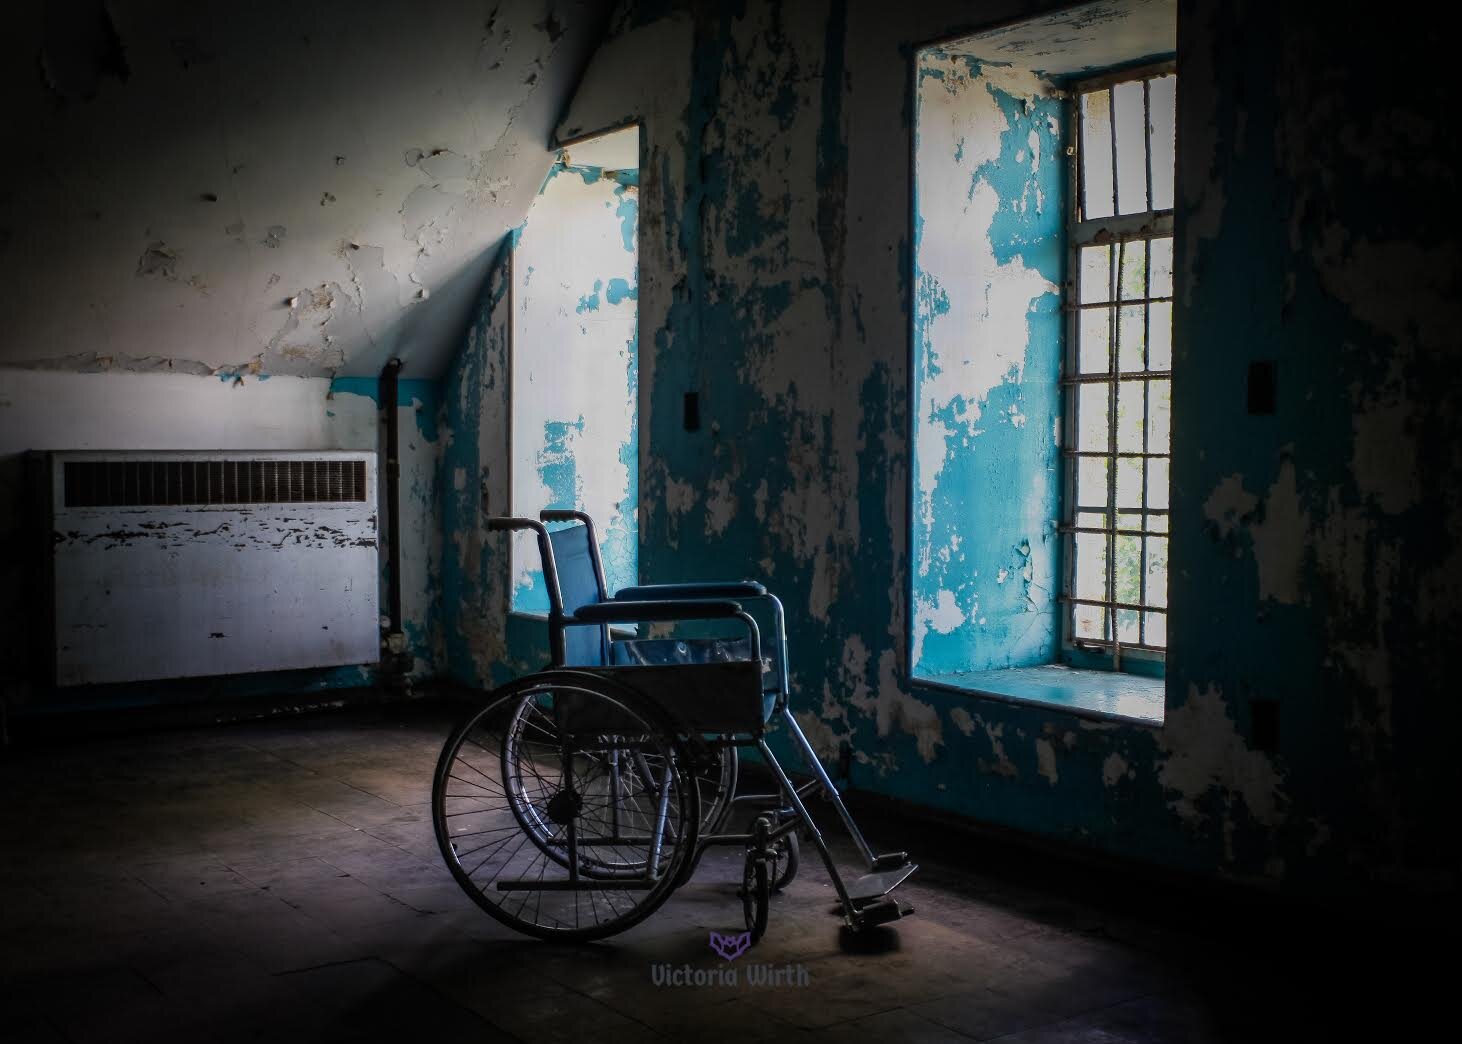  Victoria Wirth  Still Waiting  -Photo taken at the Trans Allegheny Lunatic Asylum located in Weston, West Virginia.  Prices Vary - Check Website  https://vwirthphoto.visualsociety.com/galleries/abandoned/still-waiting  Contact: VWirthPhoto@gmail.com